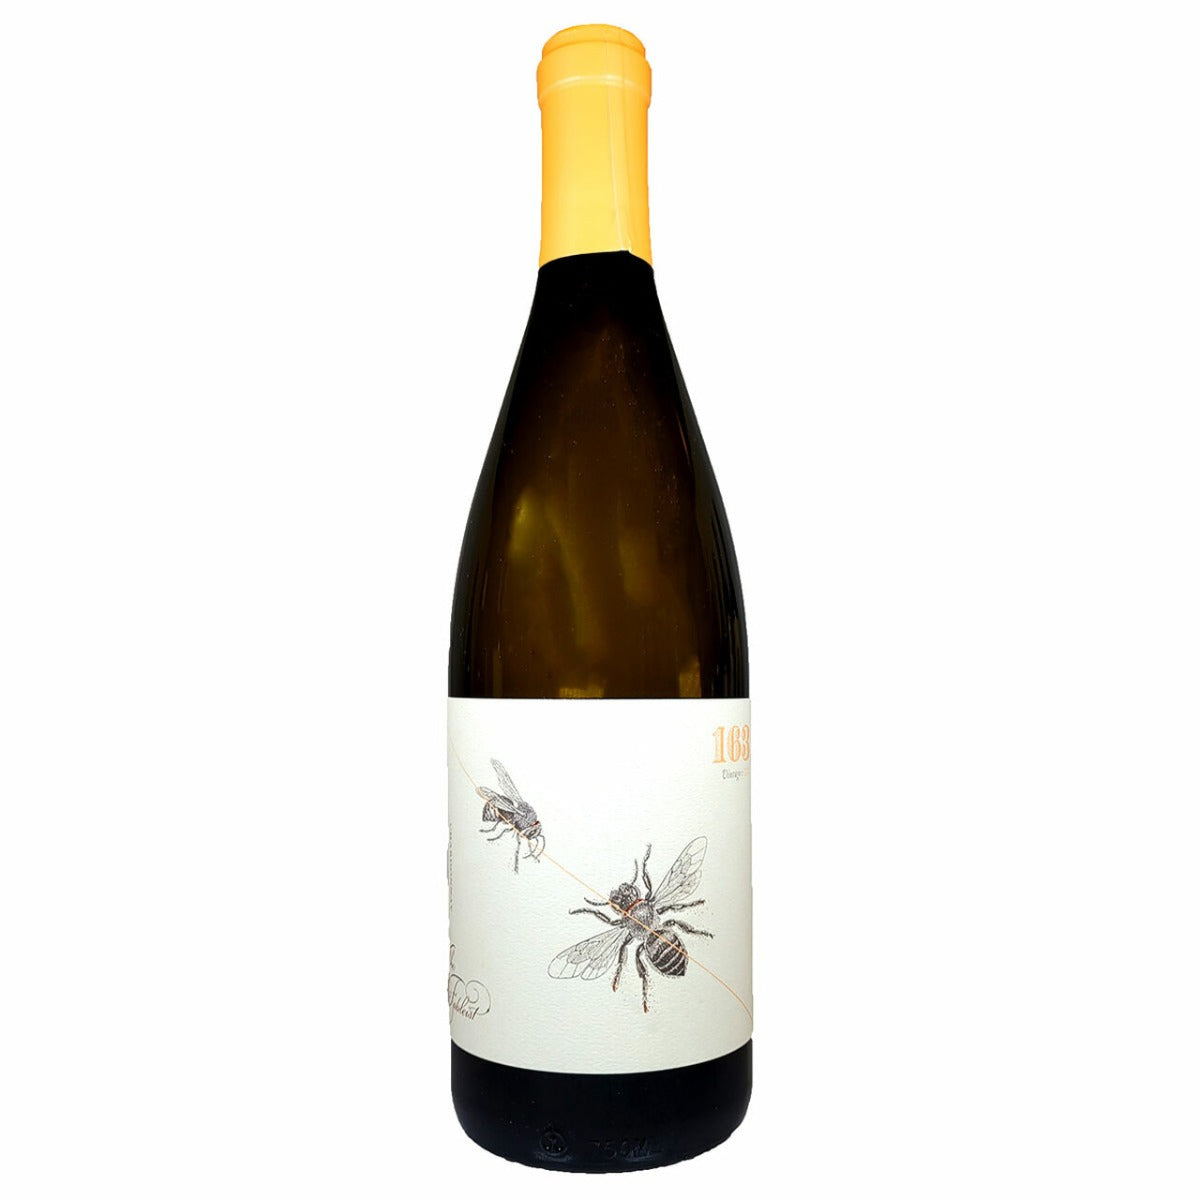 THE FABLEIST CHARDONNAY FABLE 163 CENTRAL COAST 2020